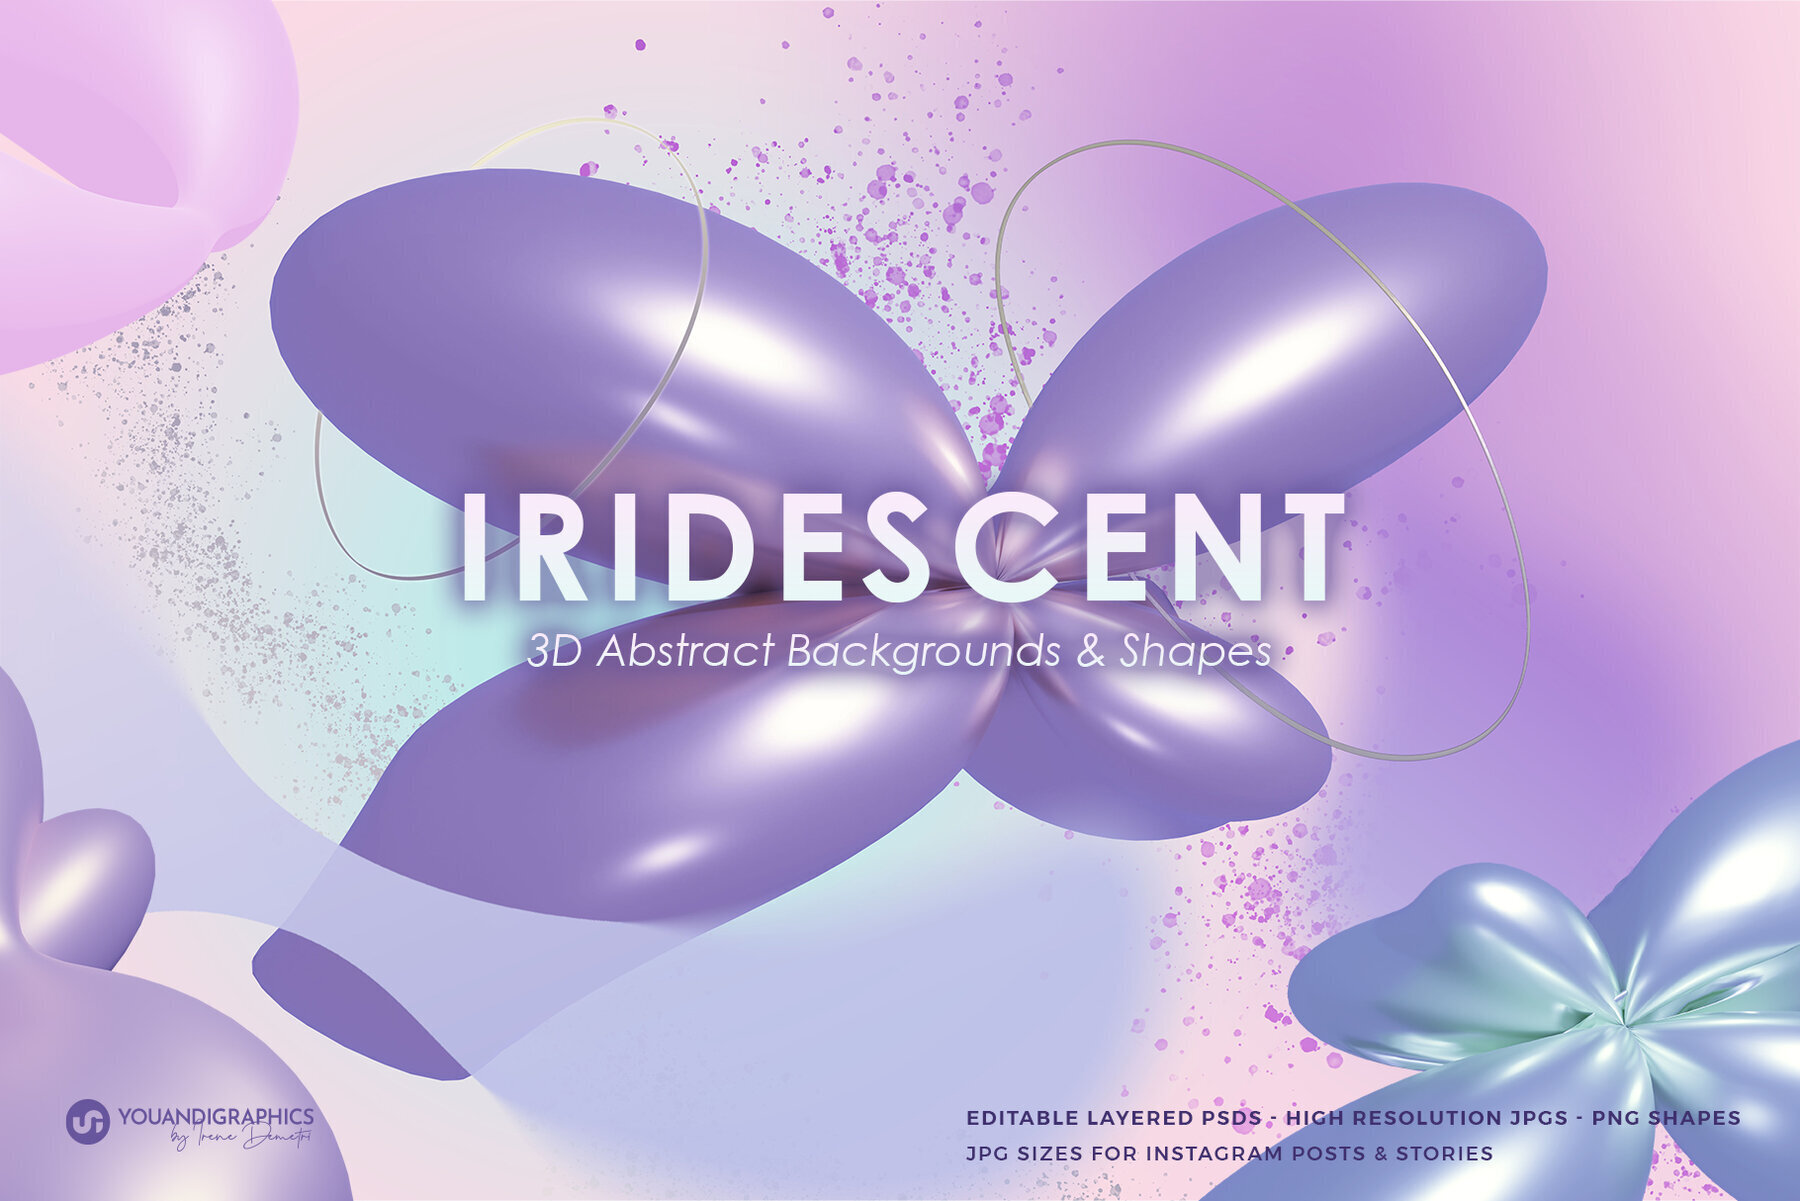 Iridescent 3D Abstract Backgrounds